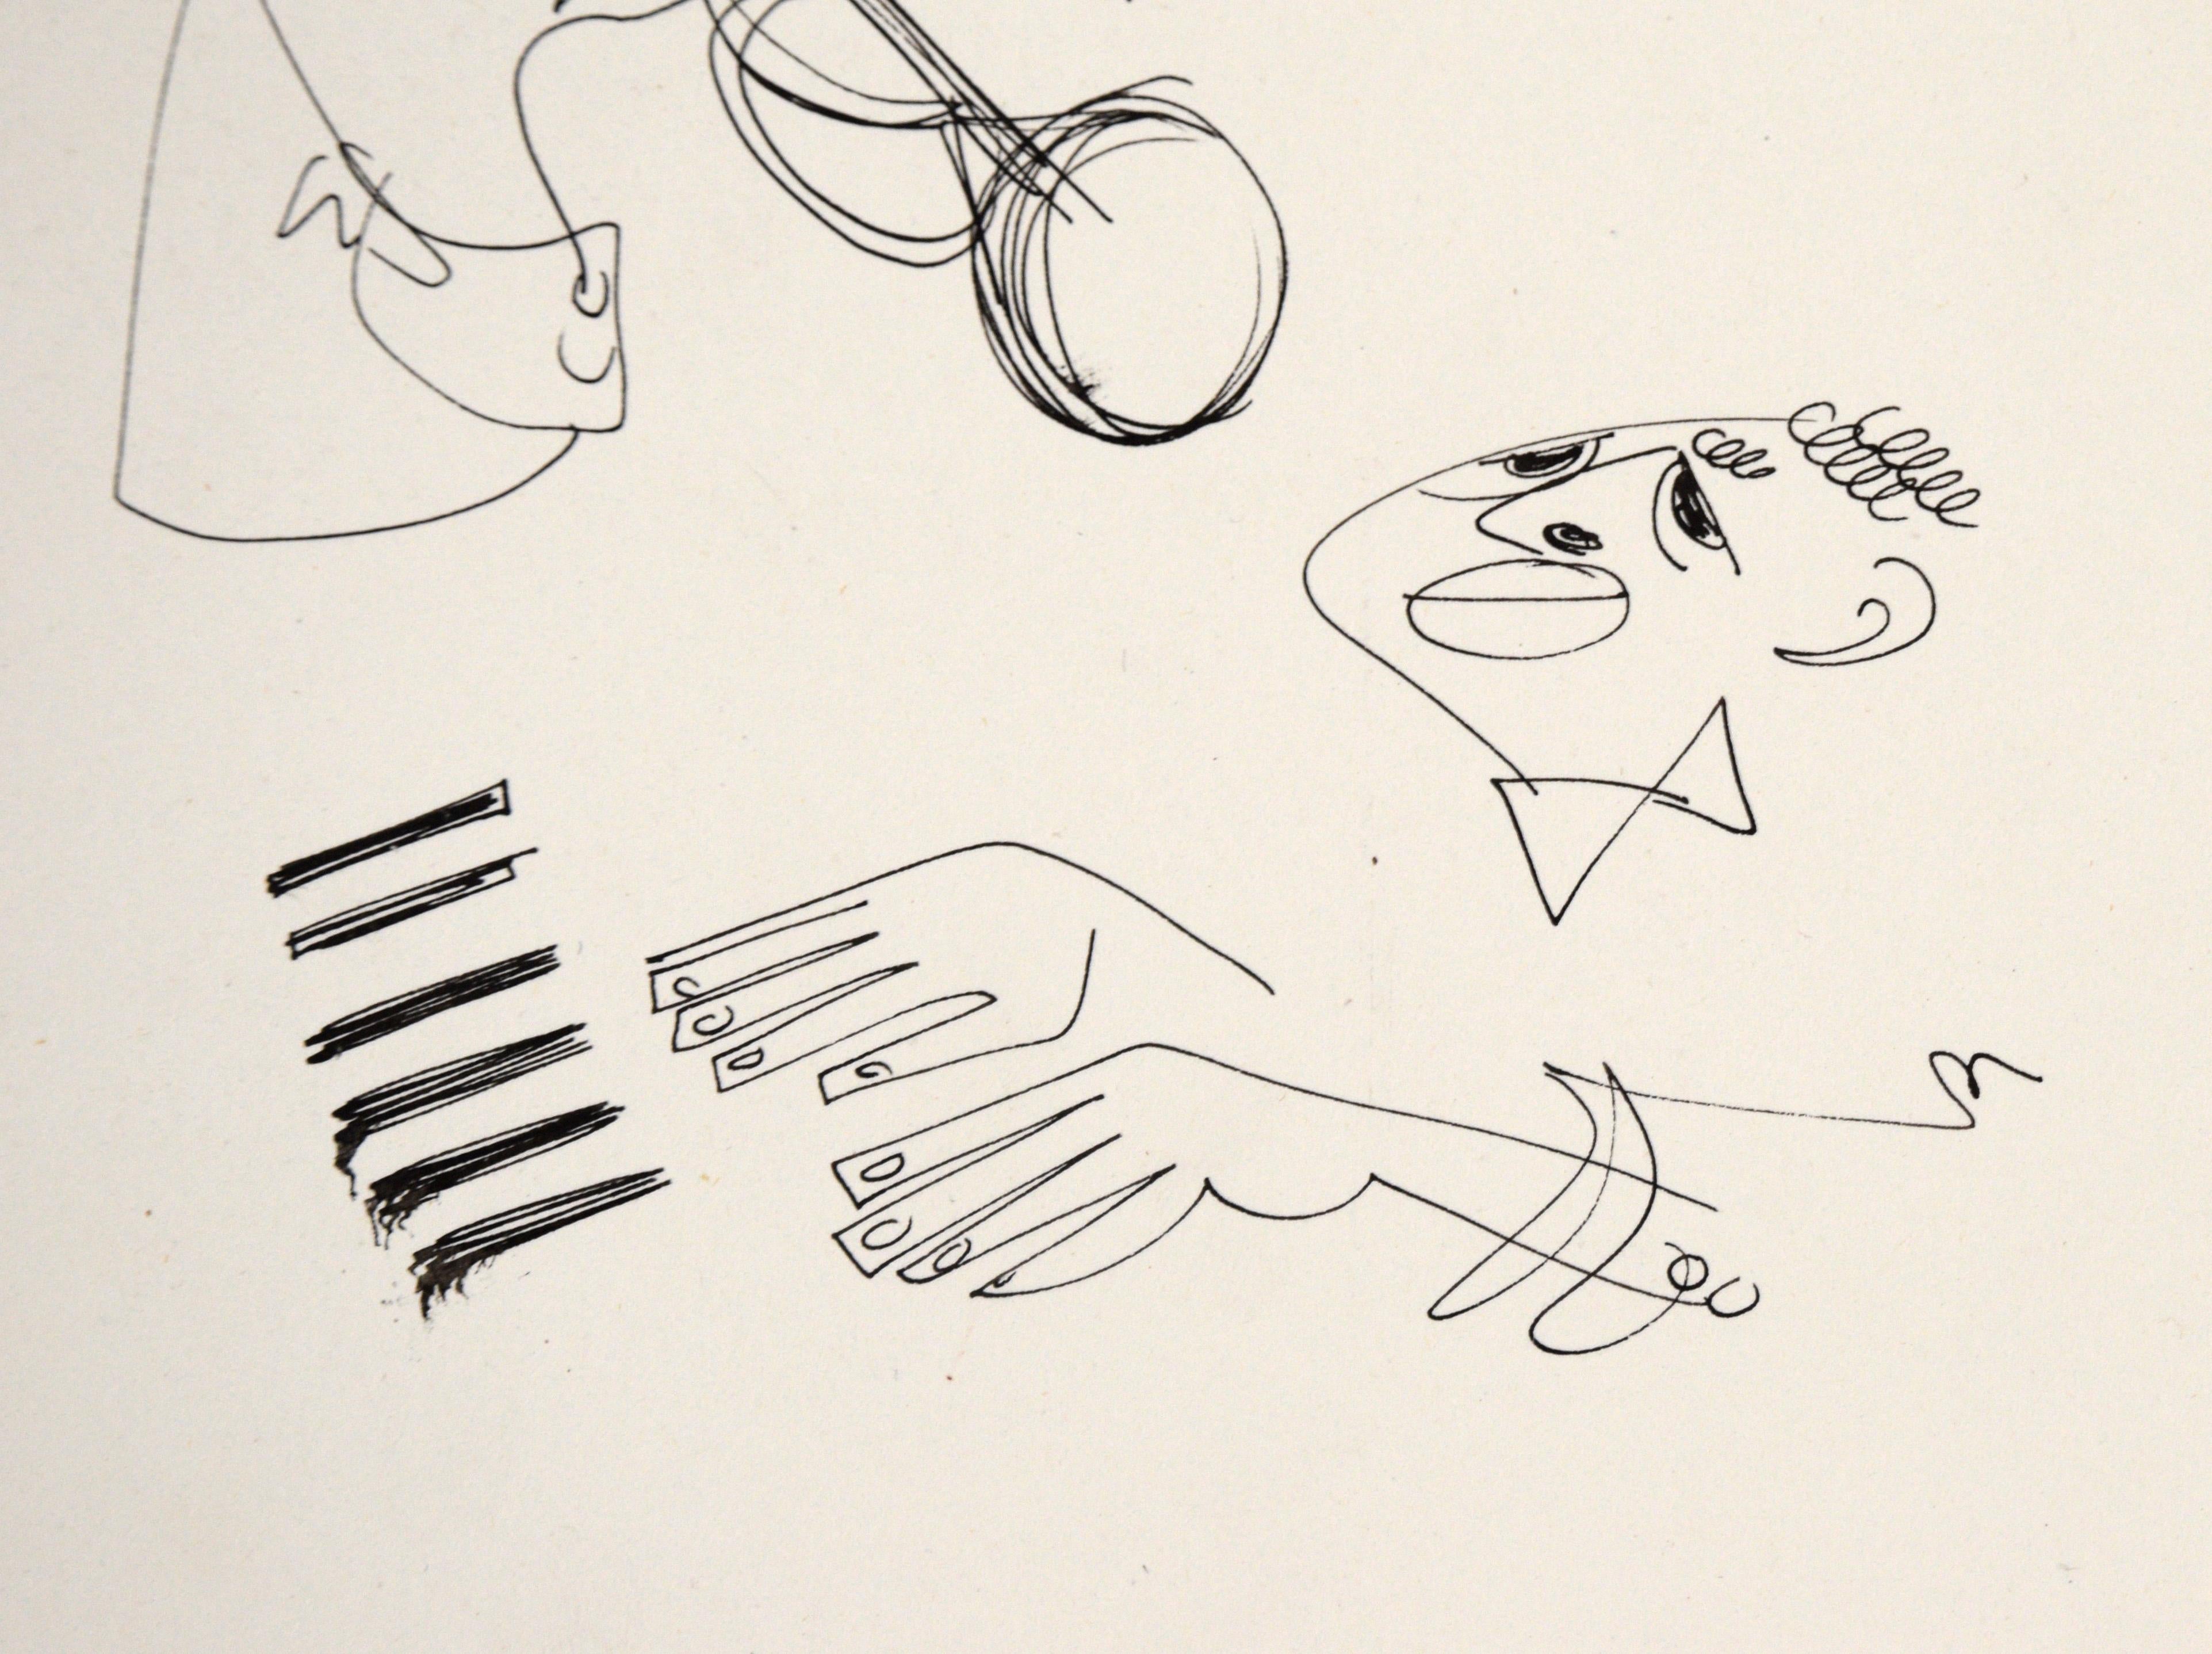 Jazz Duo - Musical Figurative Drawing in Pen on Paper

Playful figurative drawing by unknown artist 